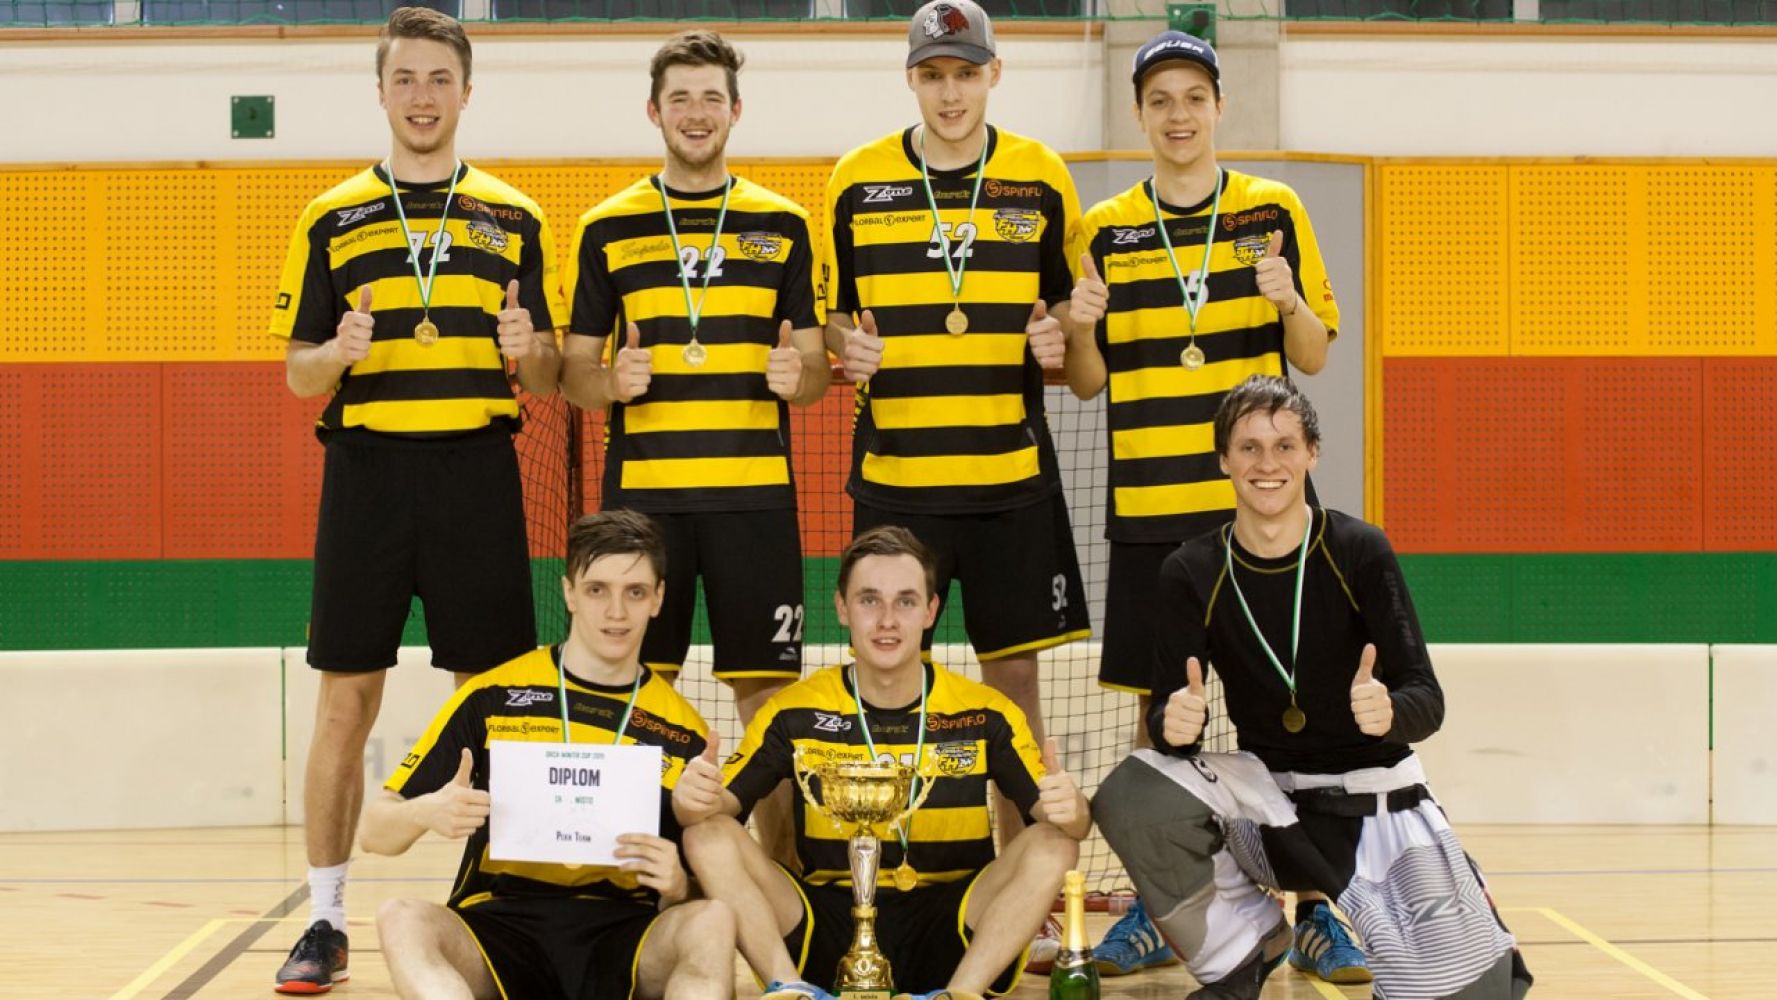 Orca Winter Cup 2015: výsledky